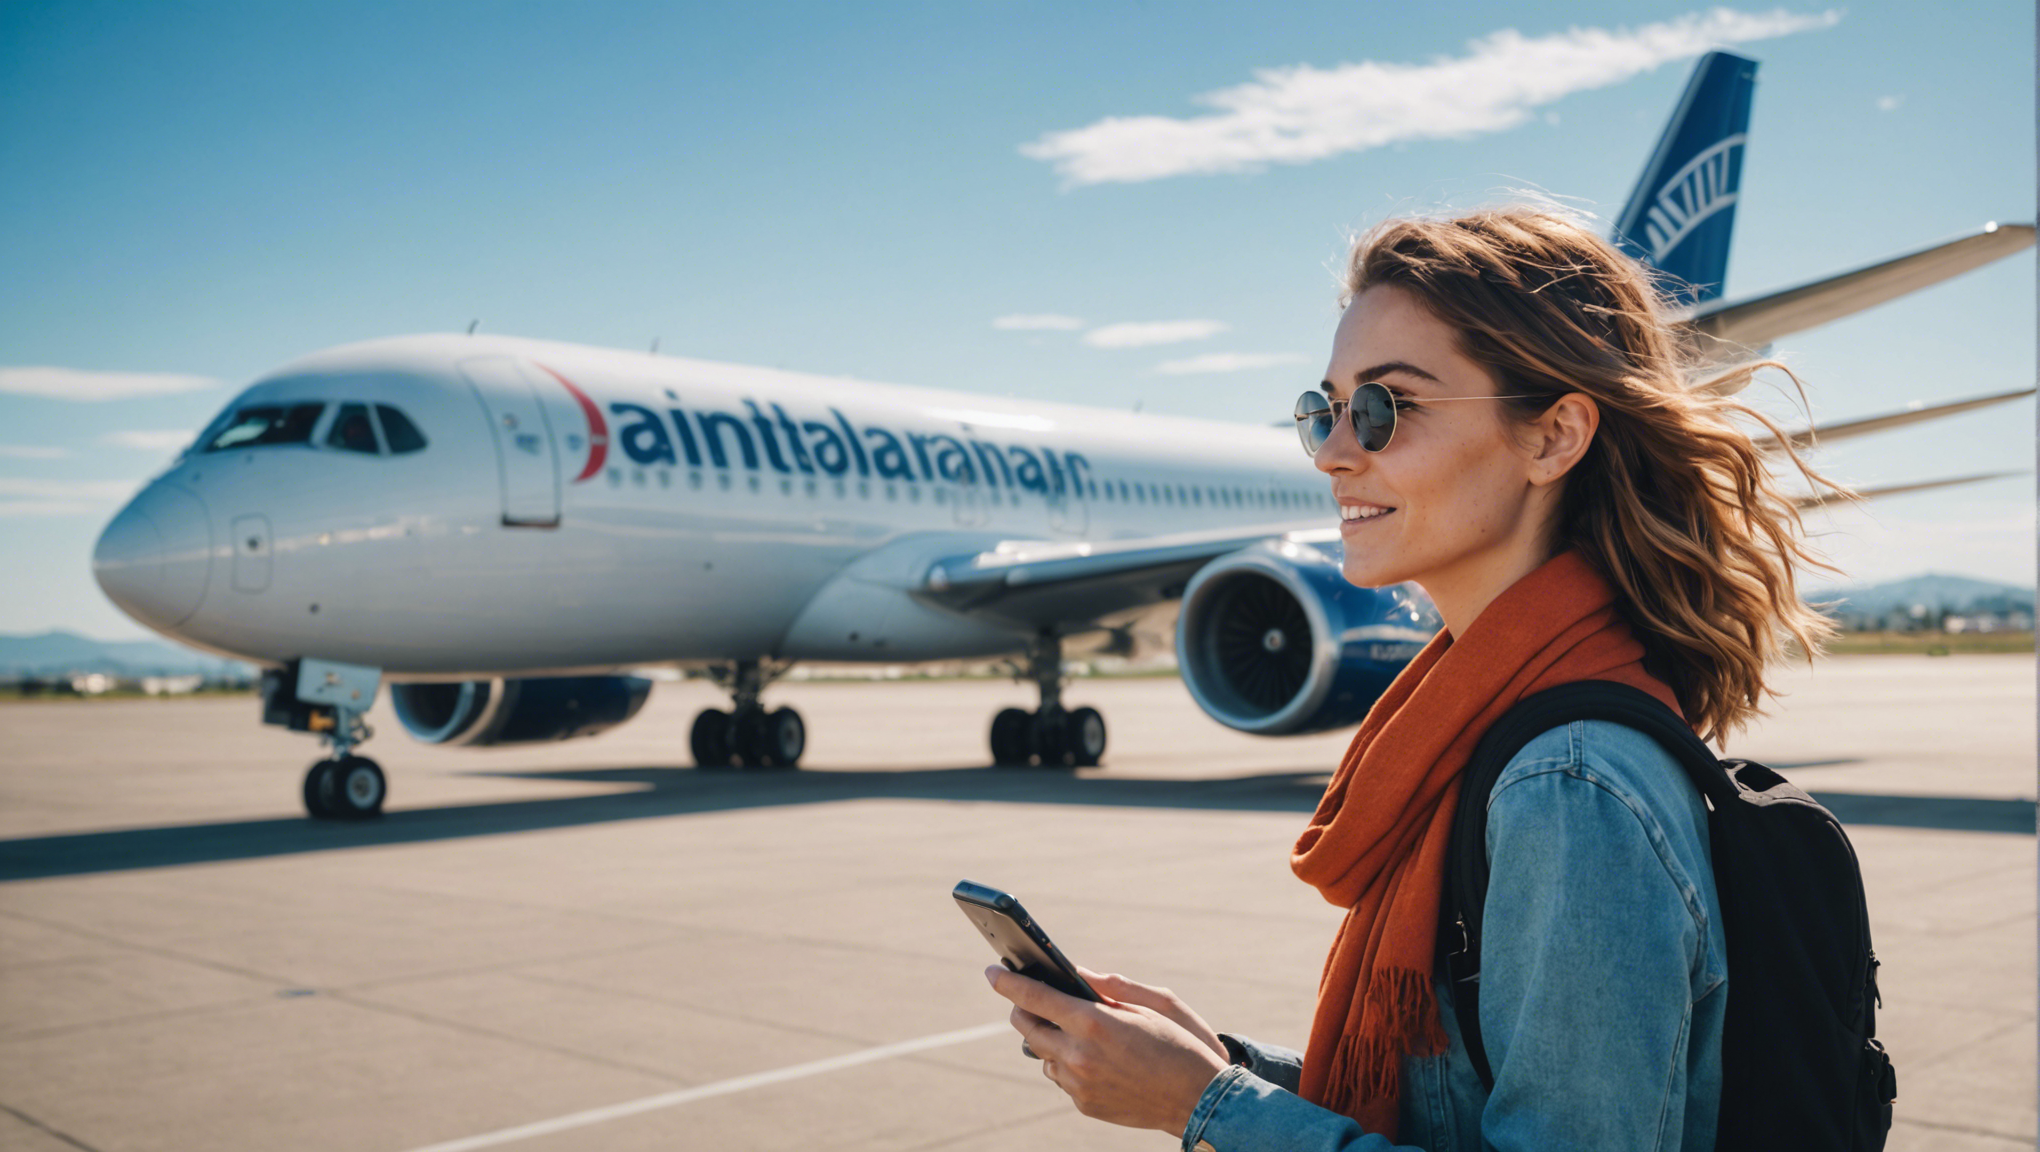 traditional airline loyalty programs have less appeal for generation z and millennials.